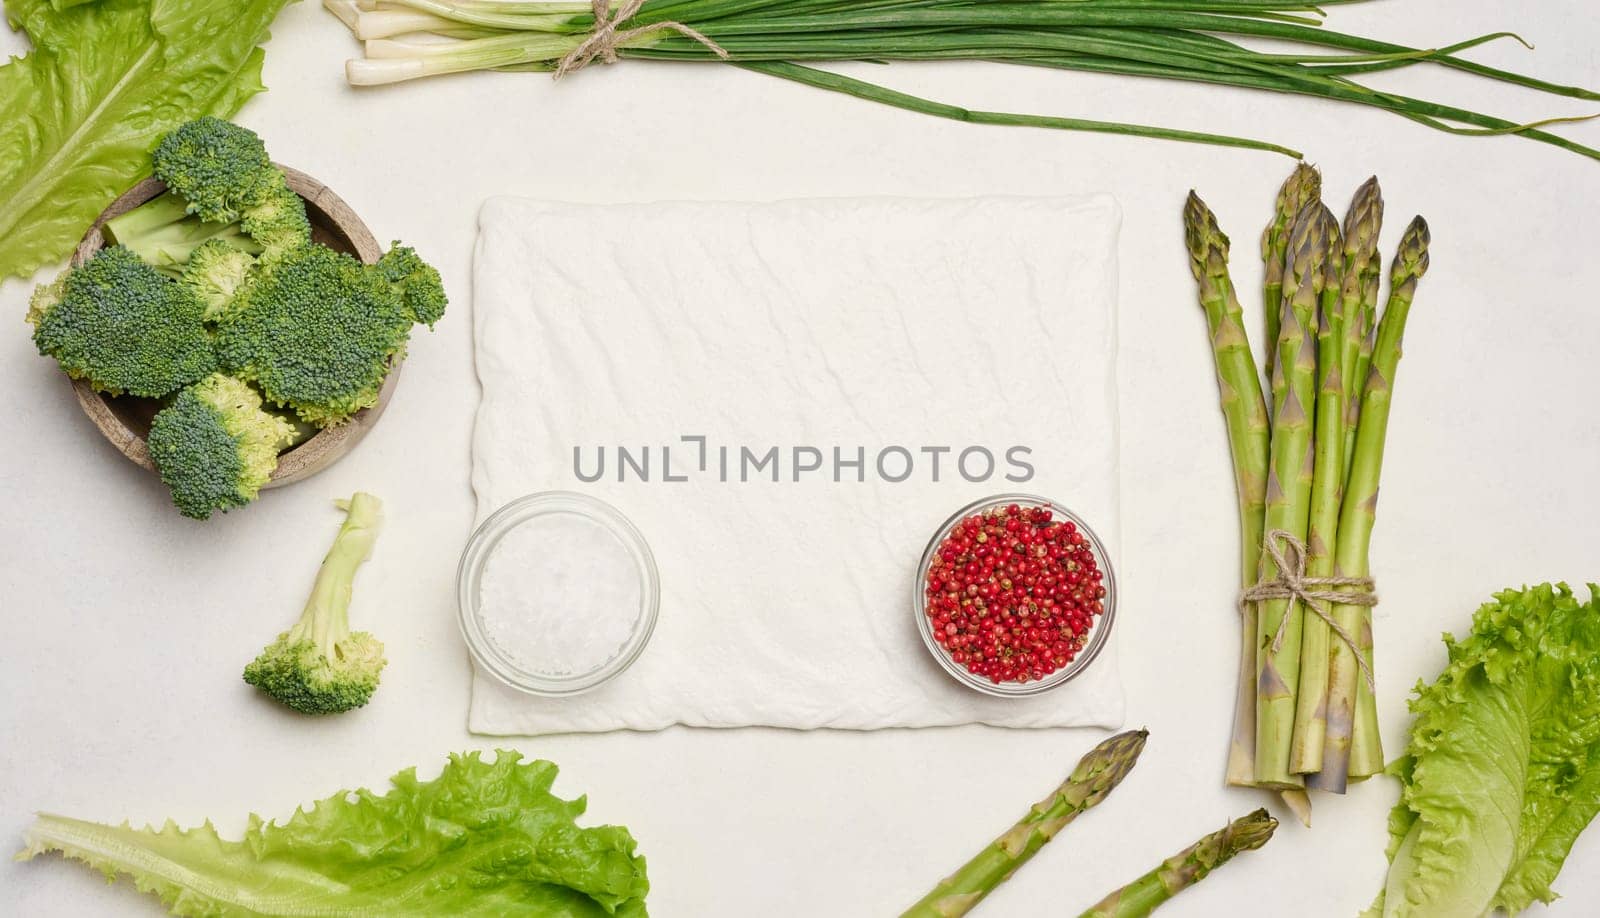 Raw asparagus, broccoli and spices on white background by ndanko